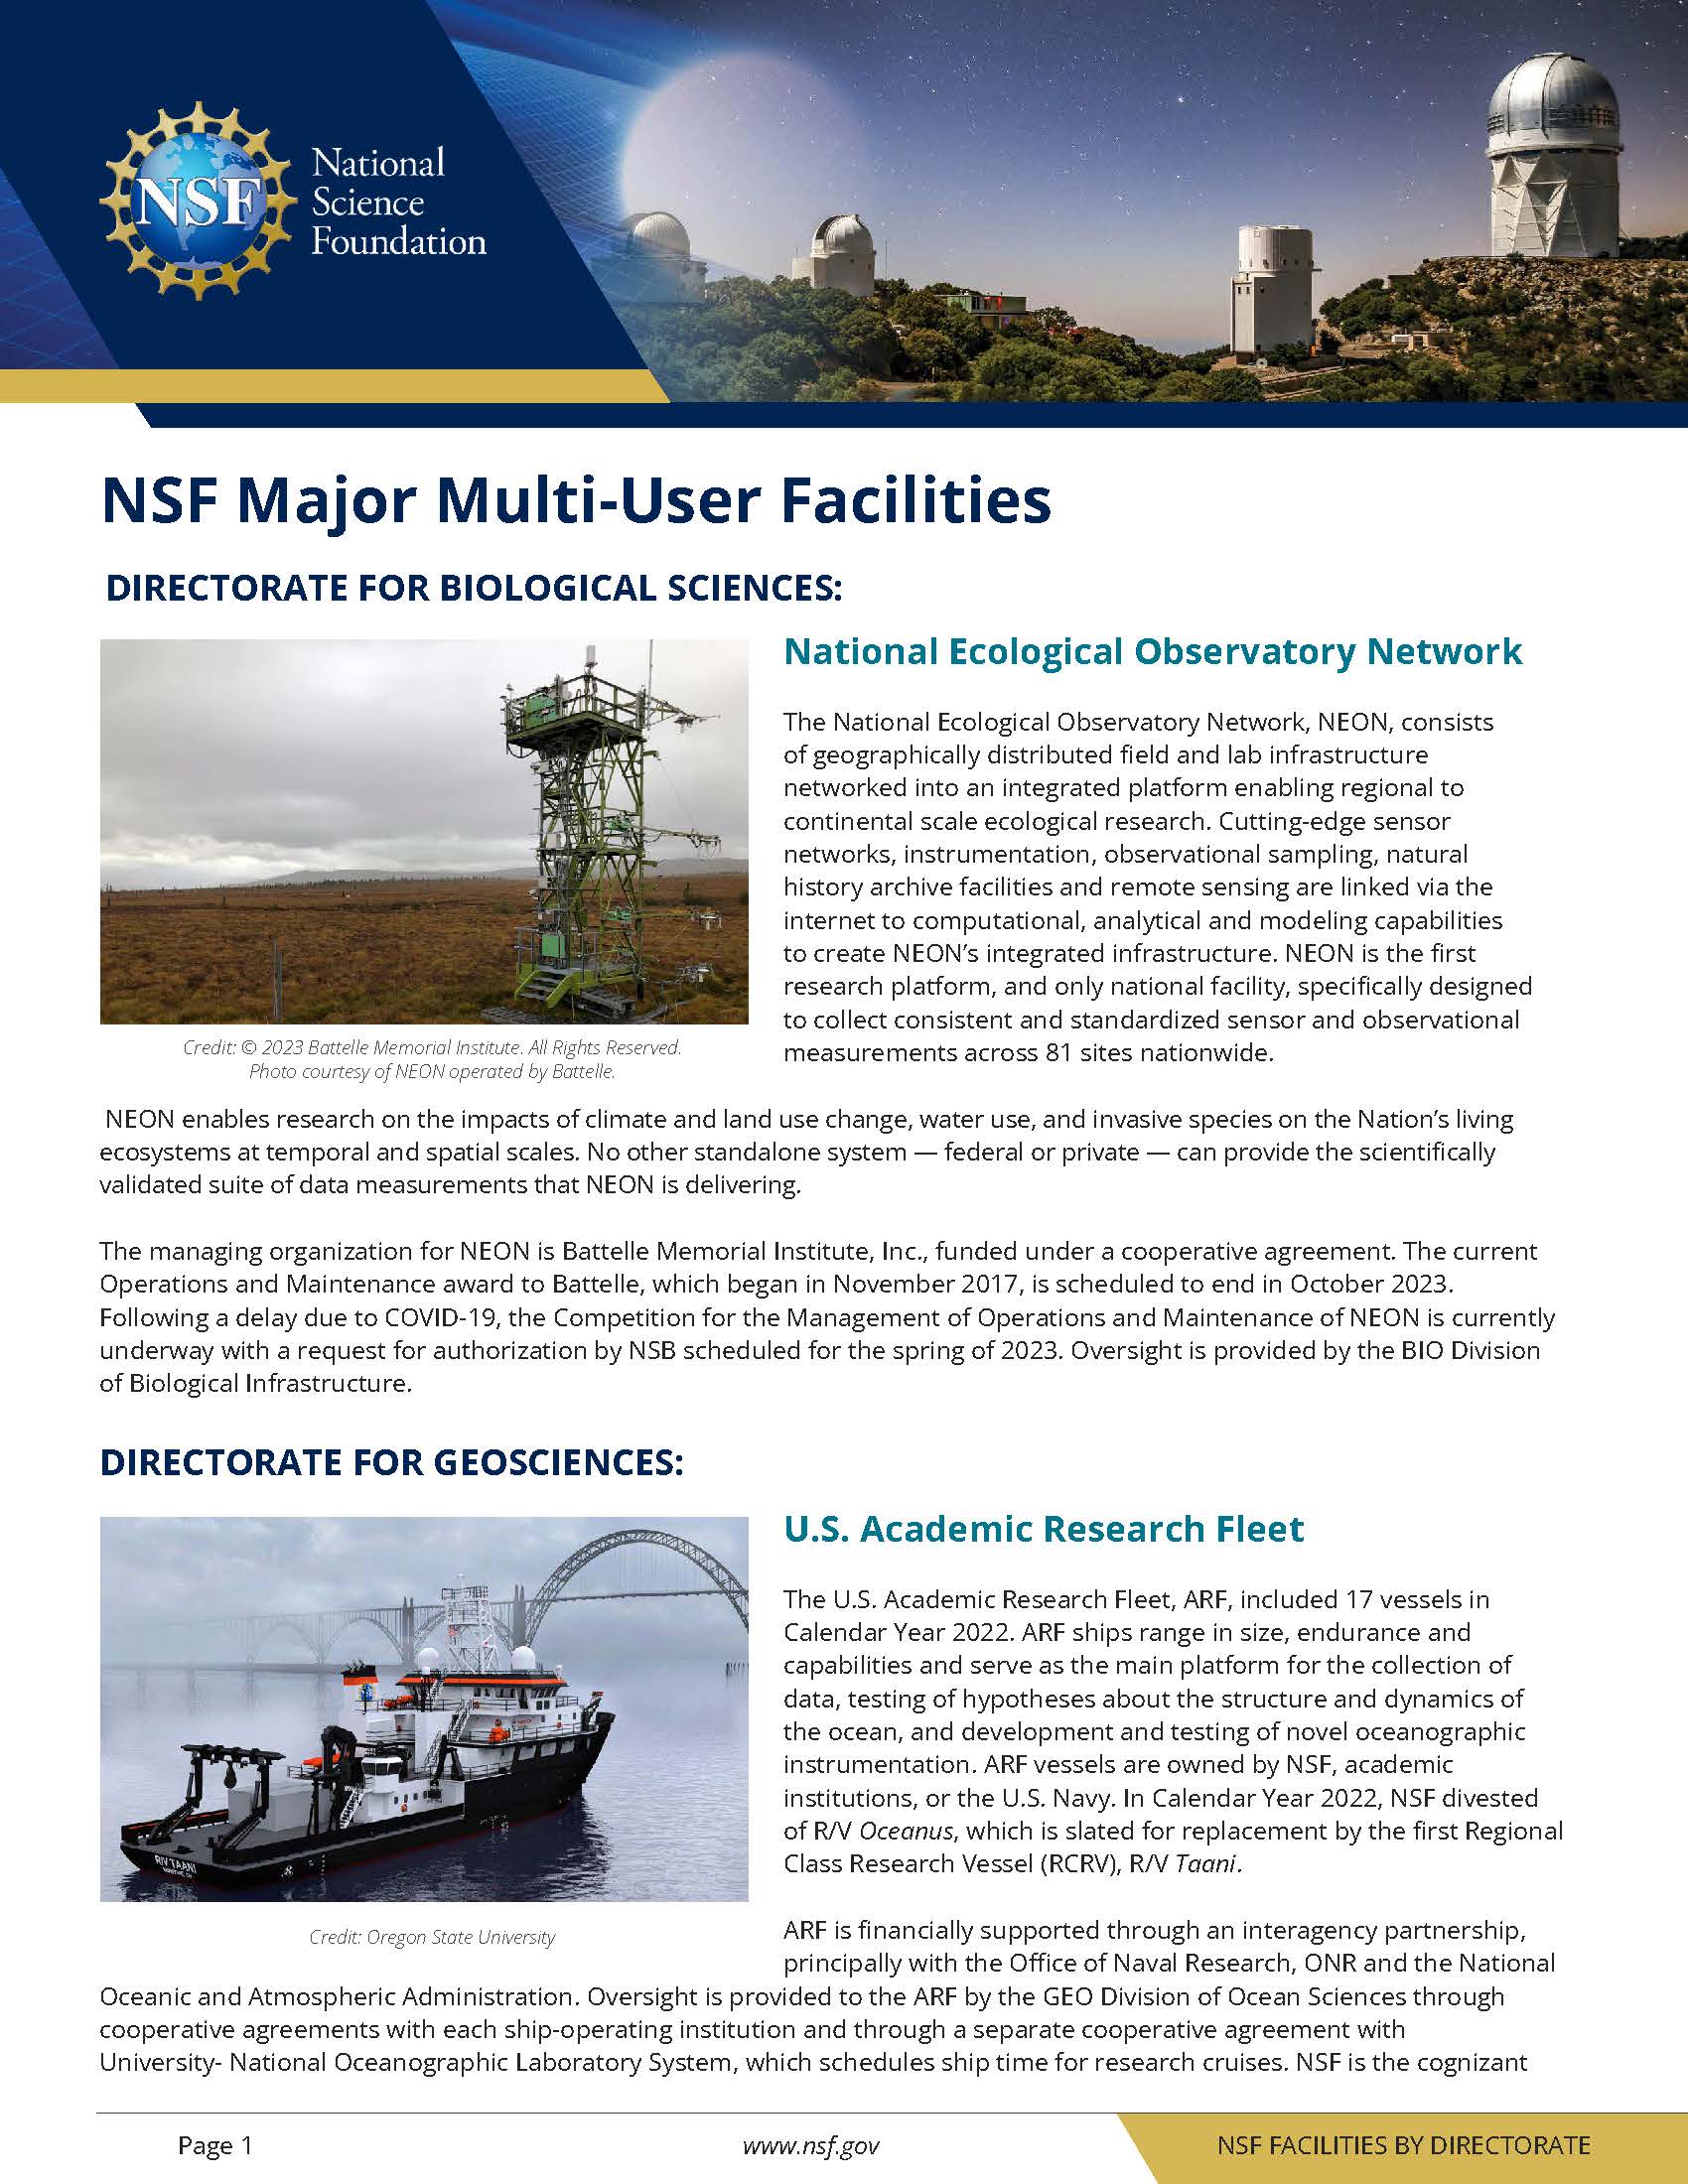 NSF Major Multi-User Facilities cover page